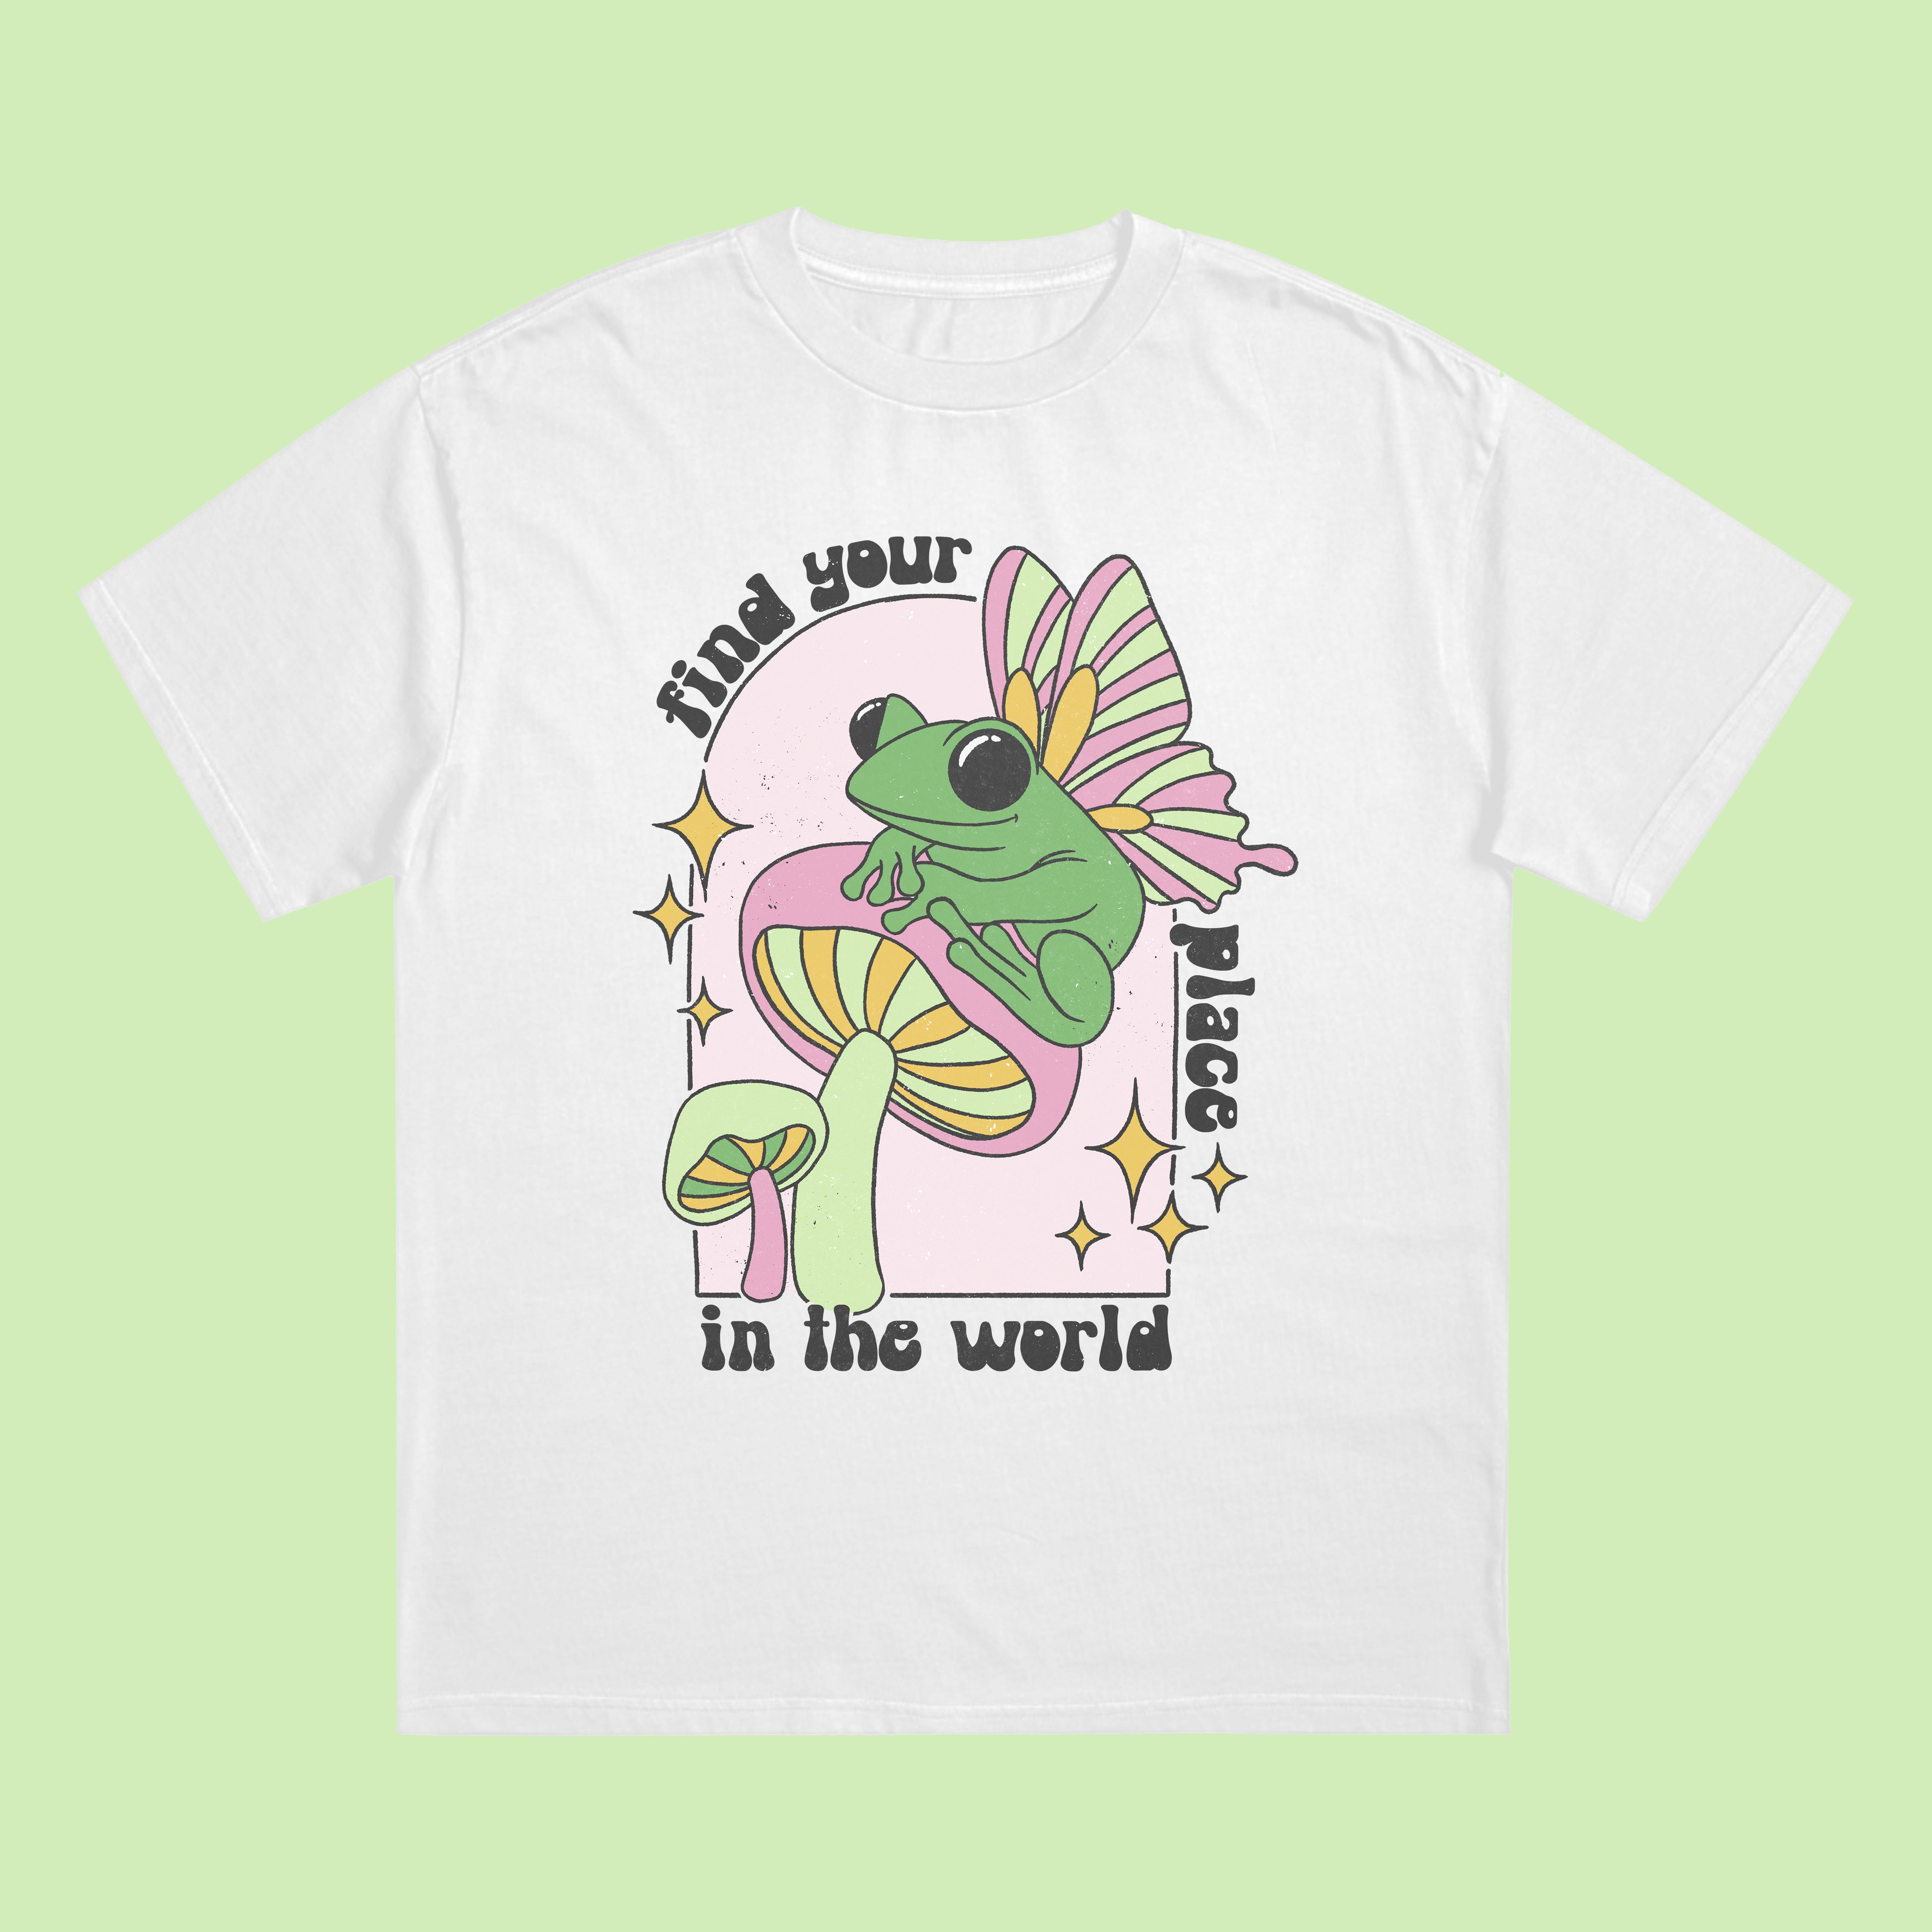 Find Your Place In The World T-Shirt